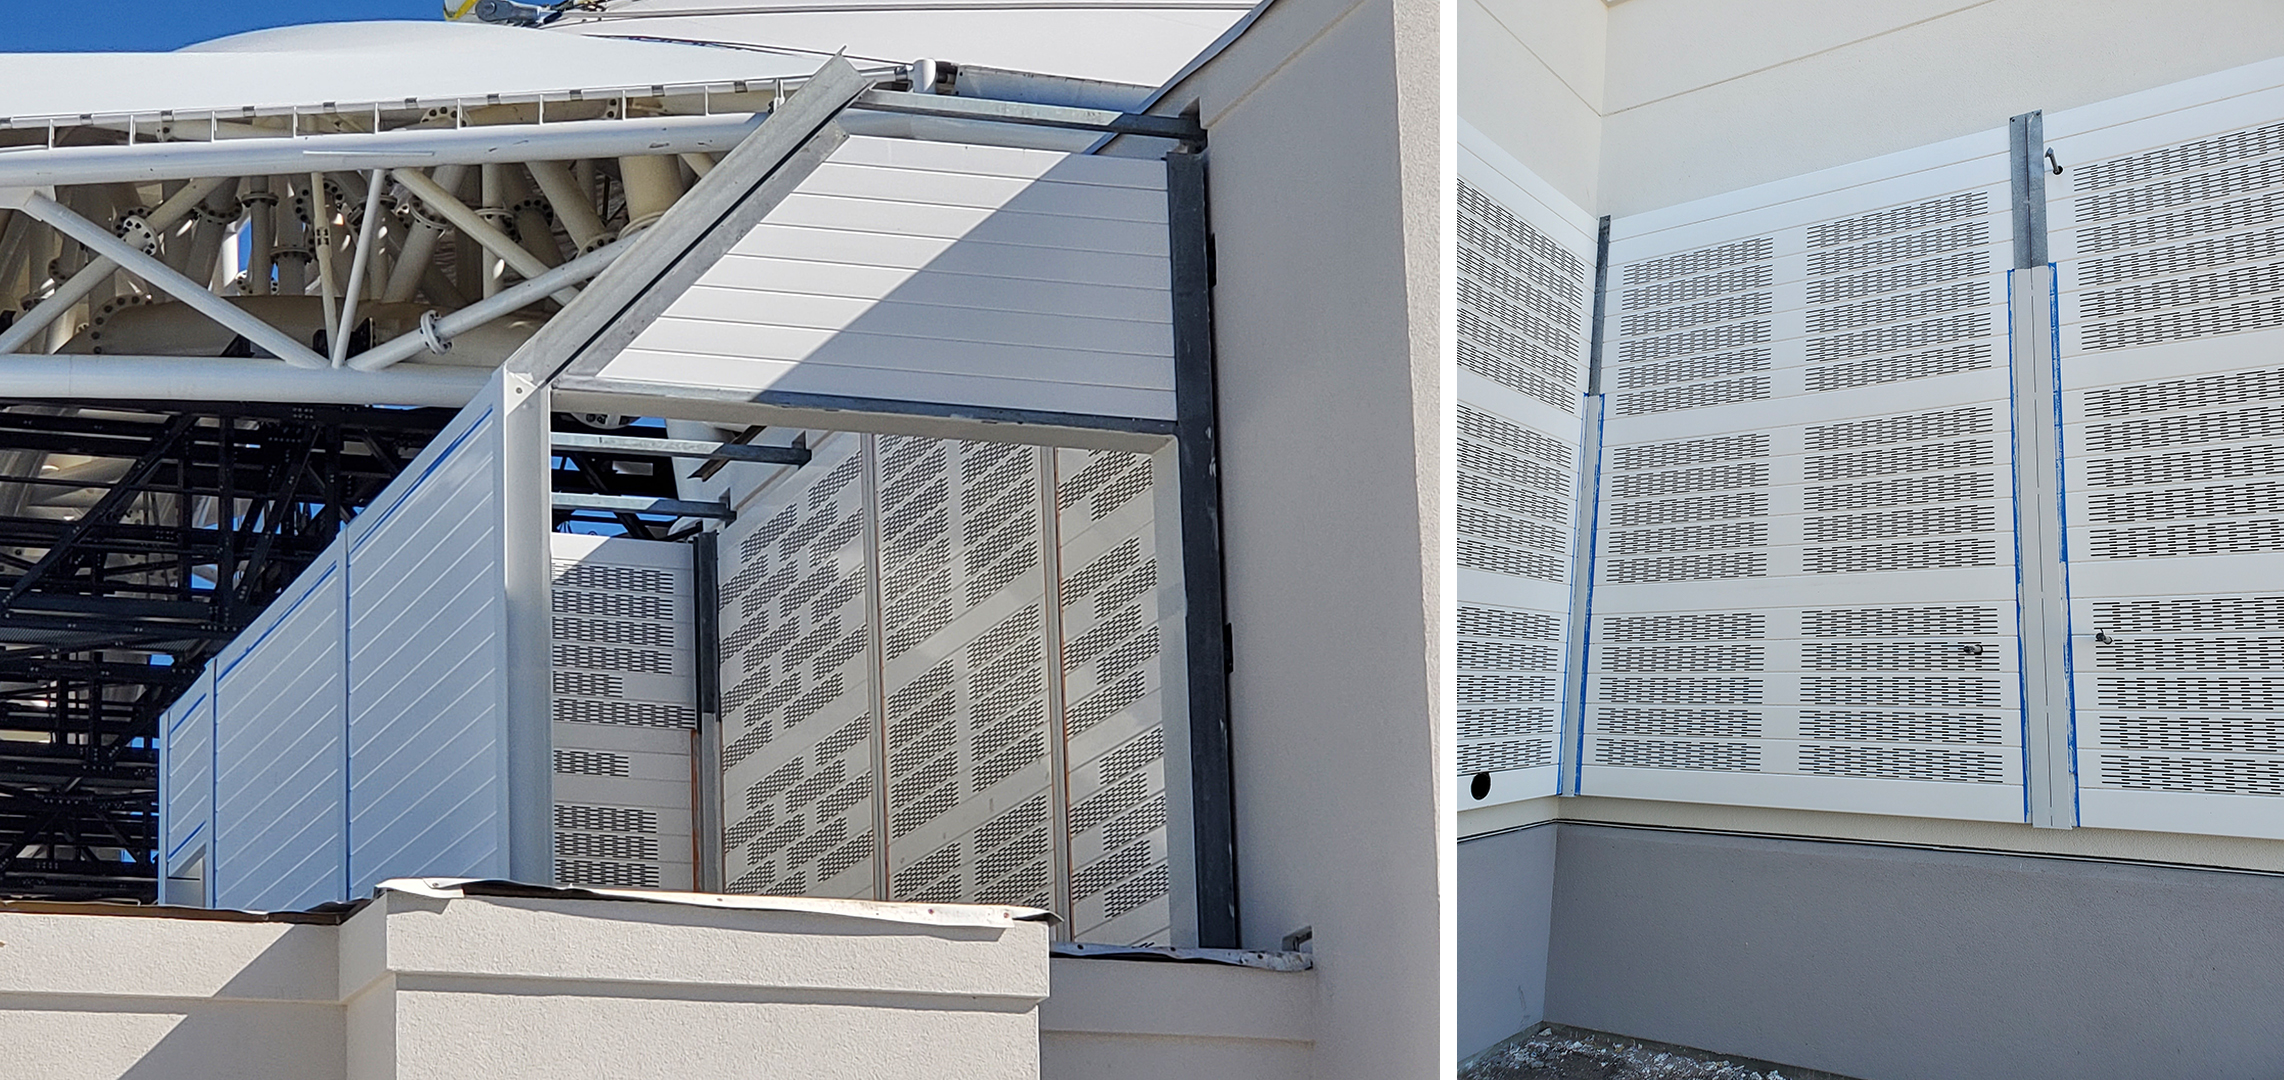 Views of wall clad panels in rooftop equipment enclosure 